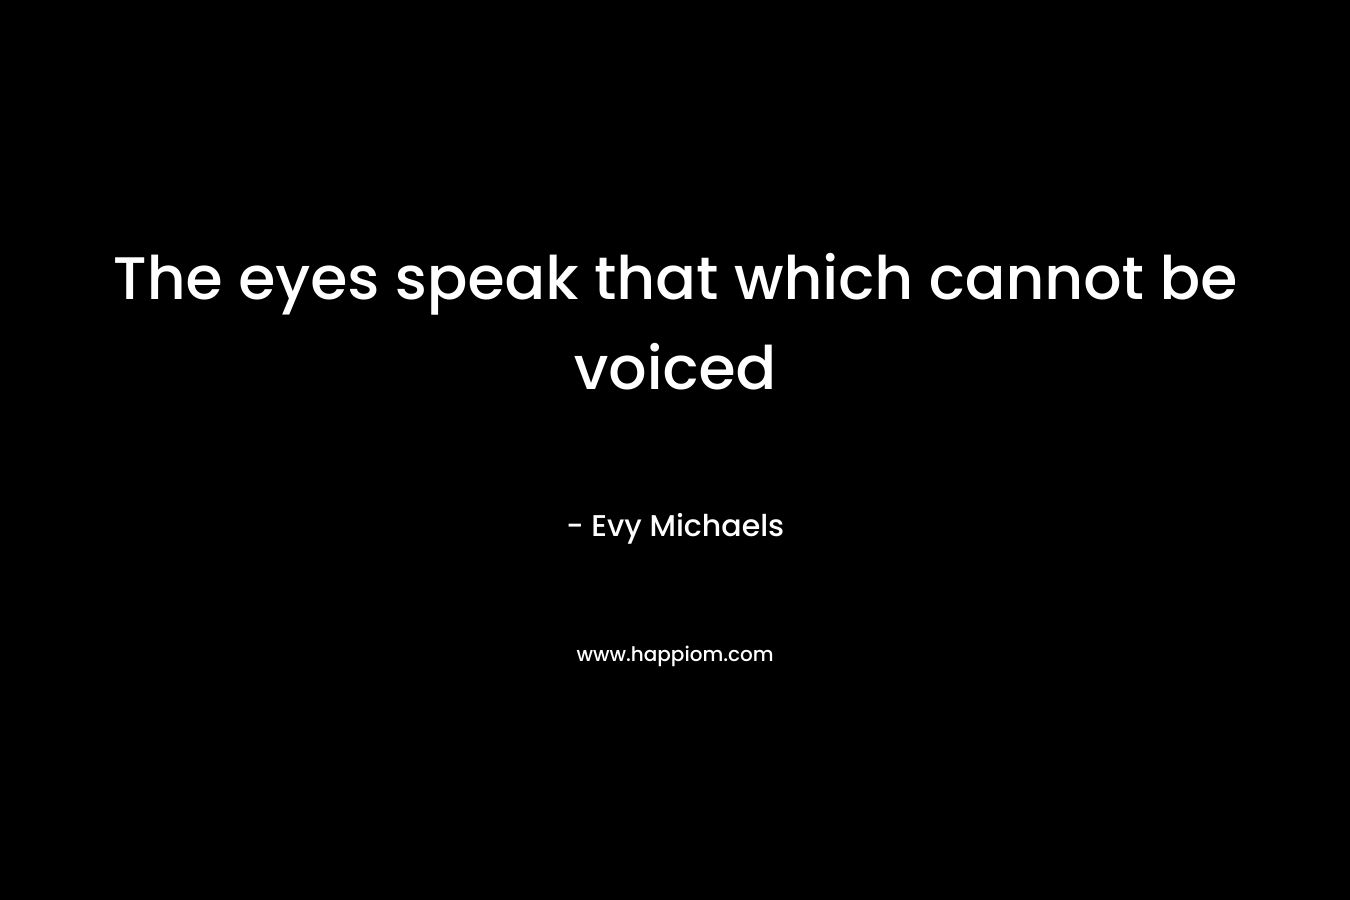 The eyes speak that which cannot be voiced